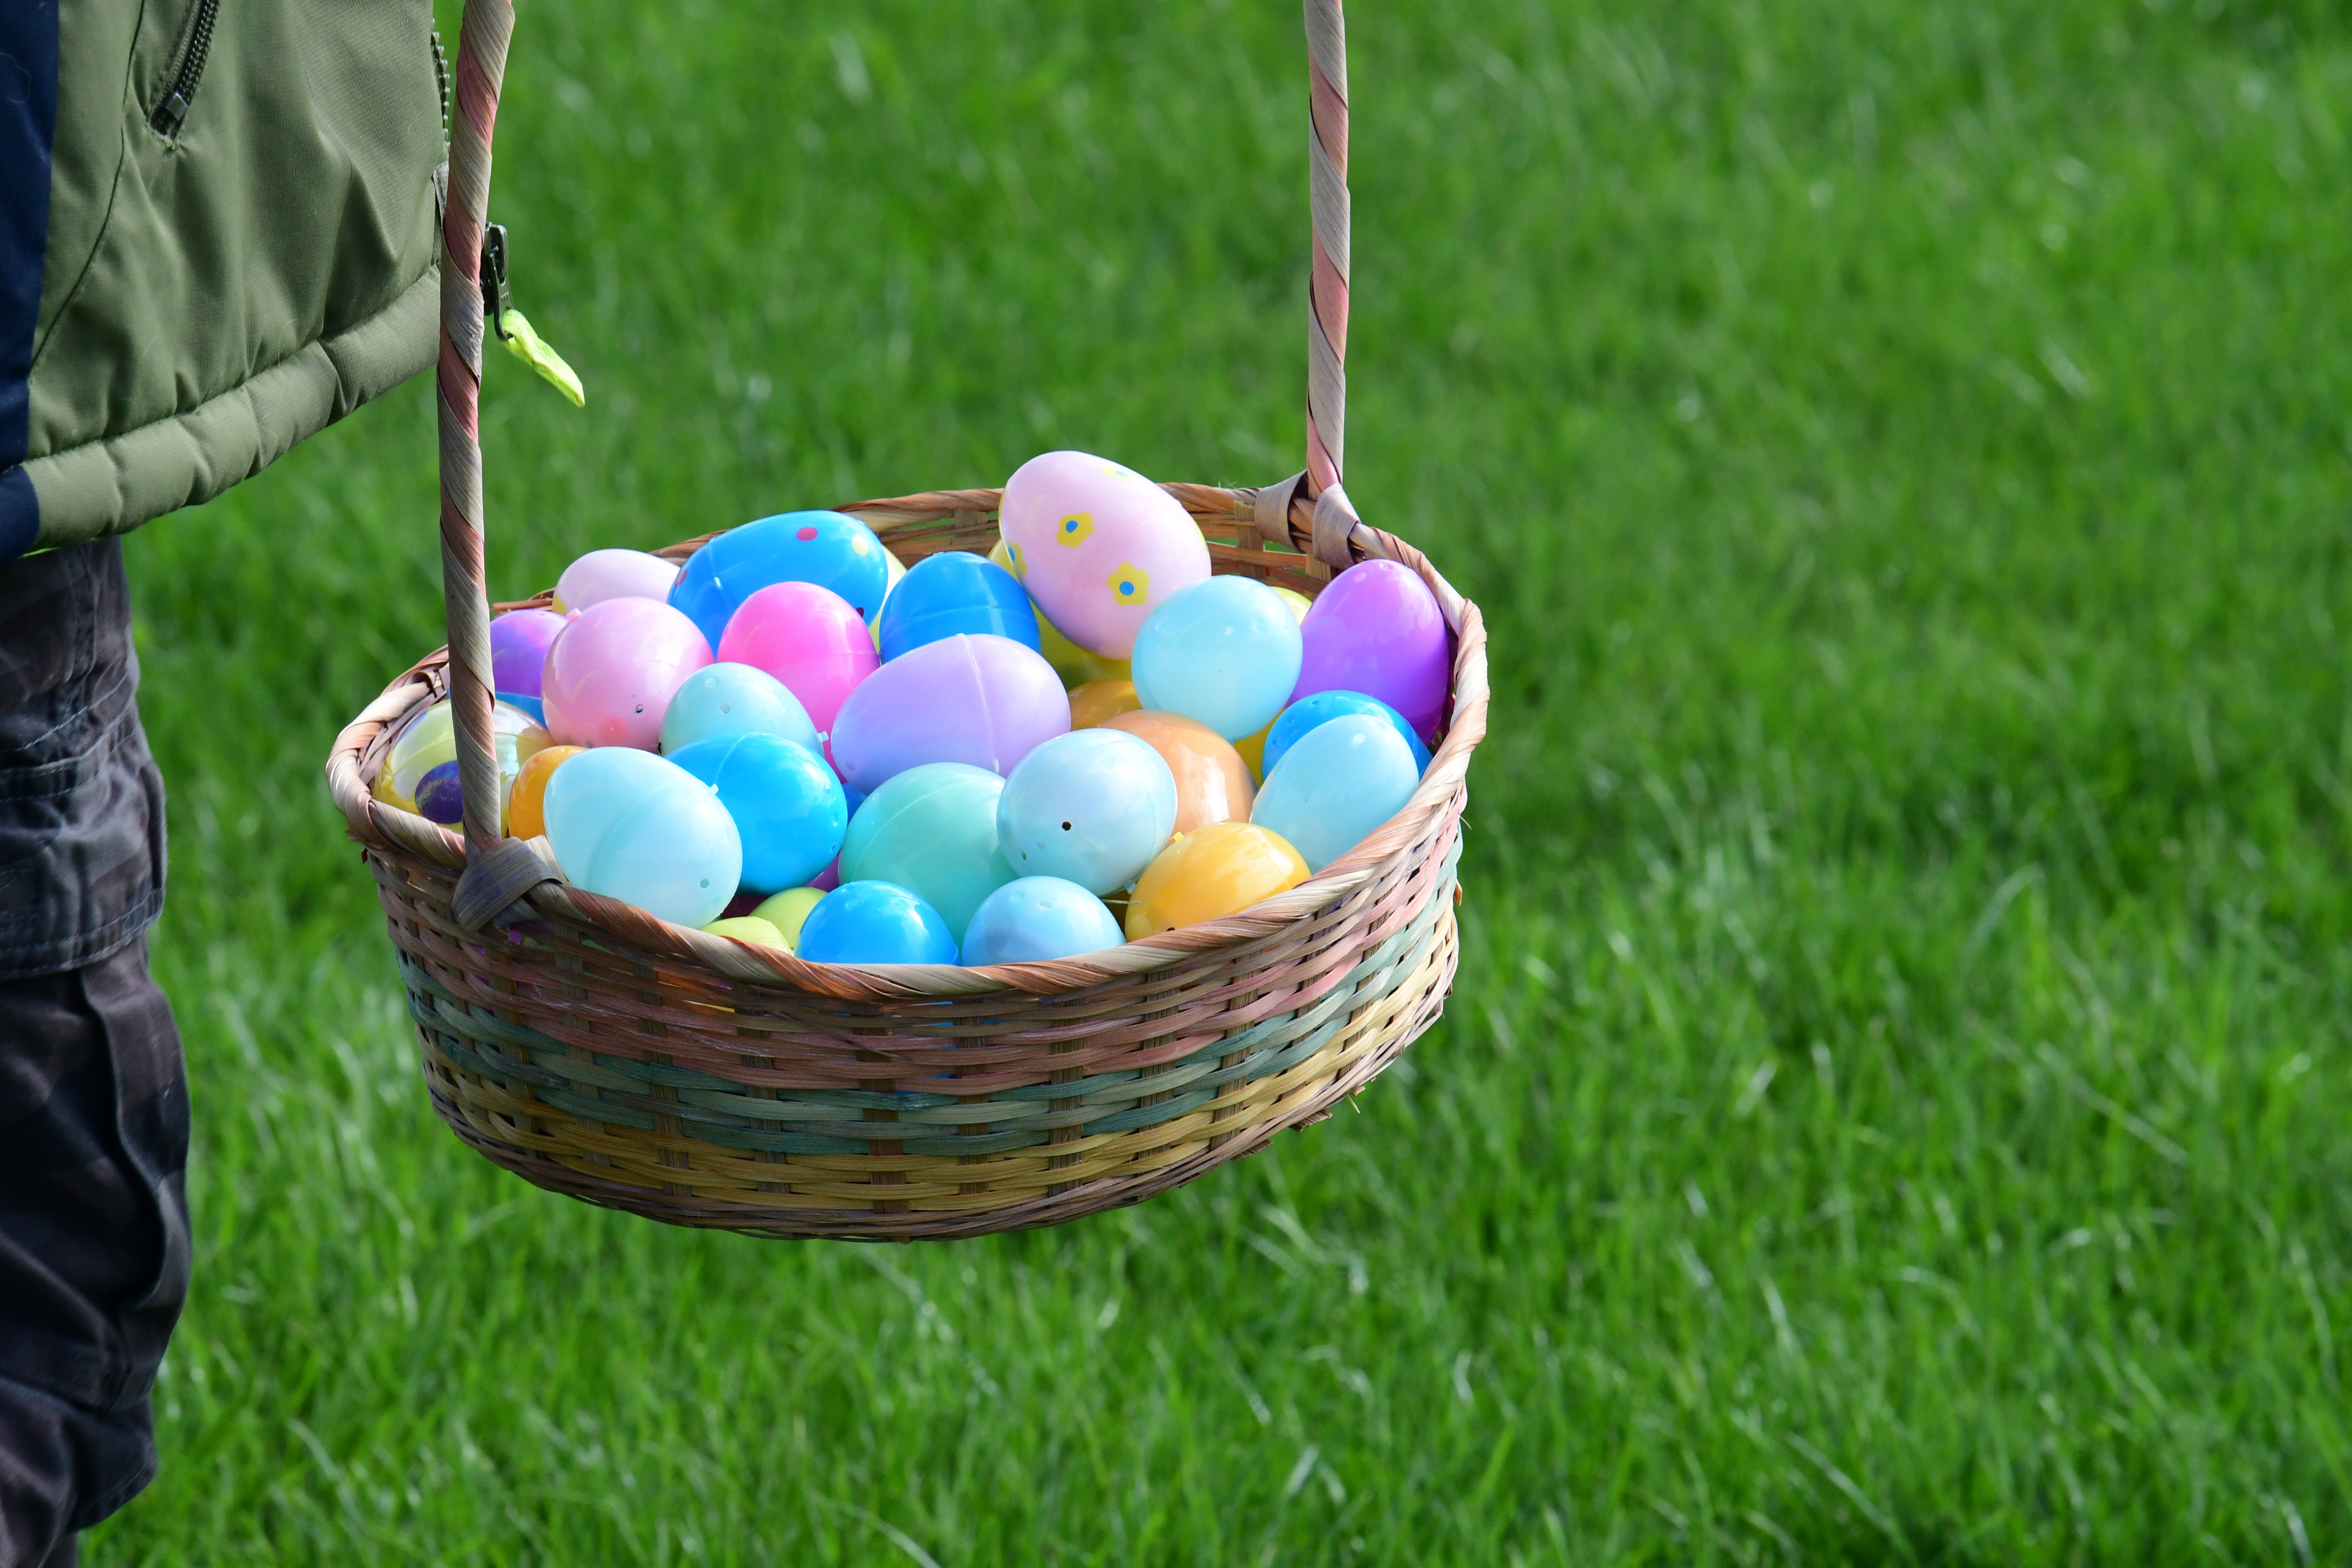 Lehigh Valley Easter Egg Hunts 2023: Where to search for eggs and hang with the Easter Bunny (UPDATE) - lehighvalleylive.com